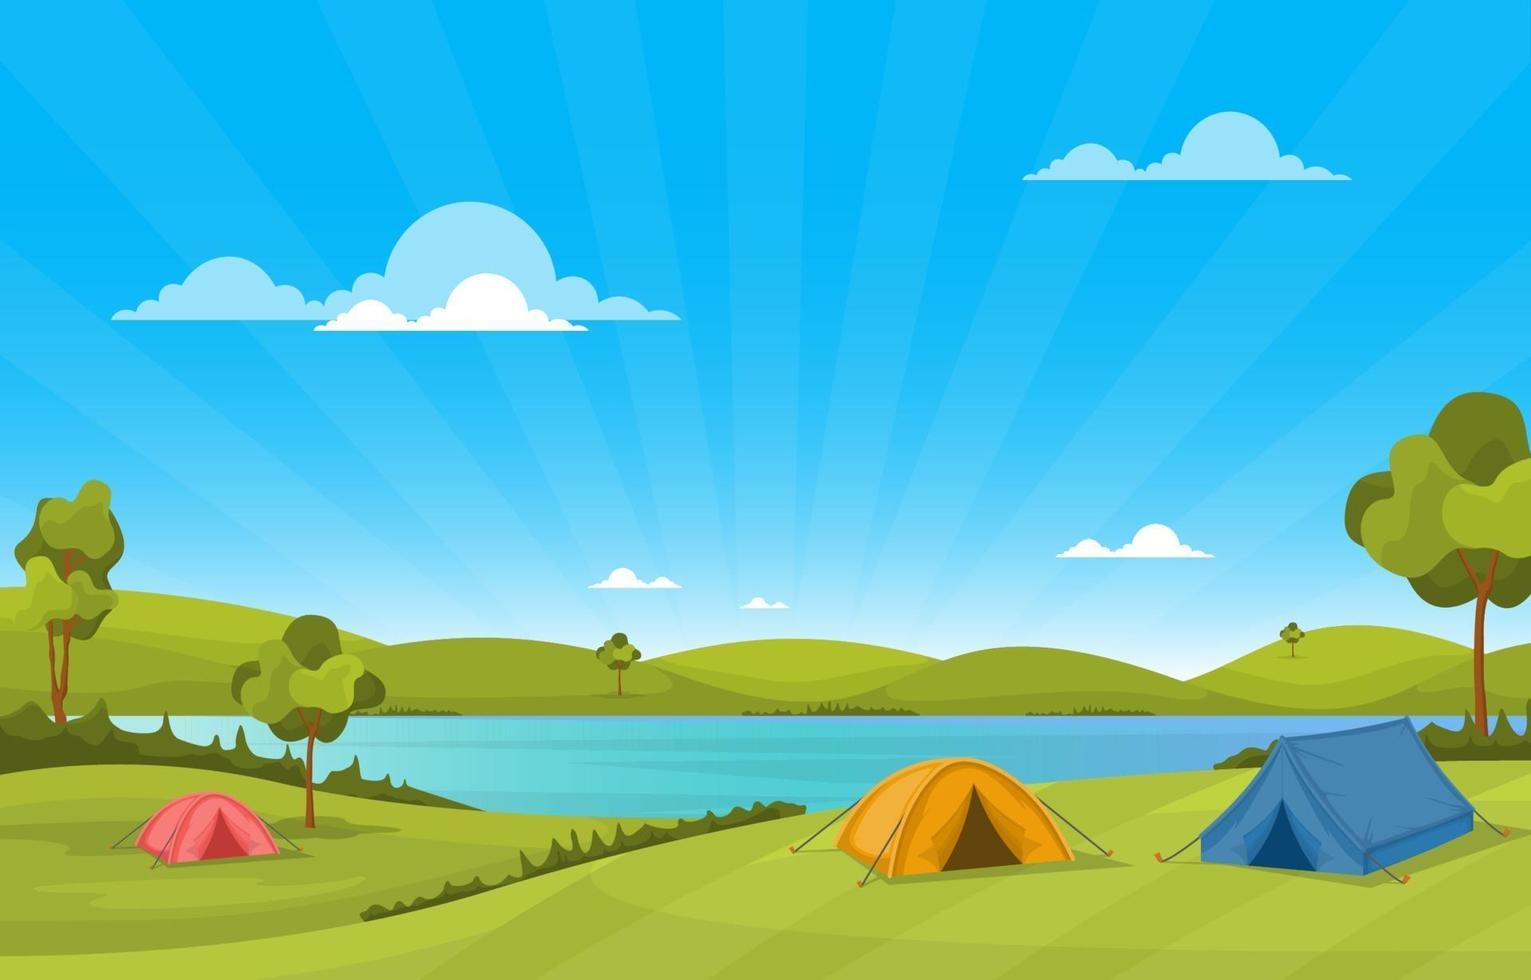 Camping Tents and Campfire By River and Mountains vector